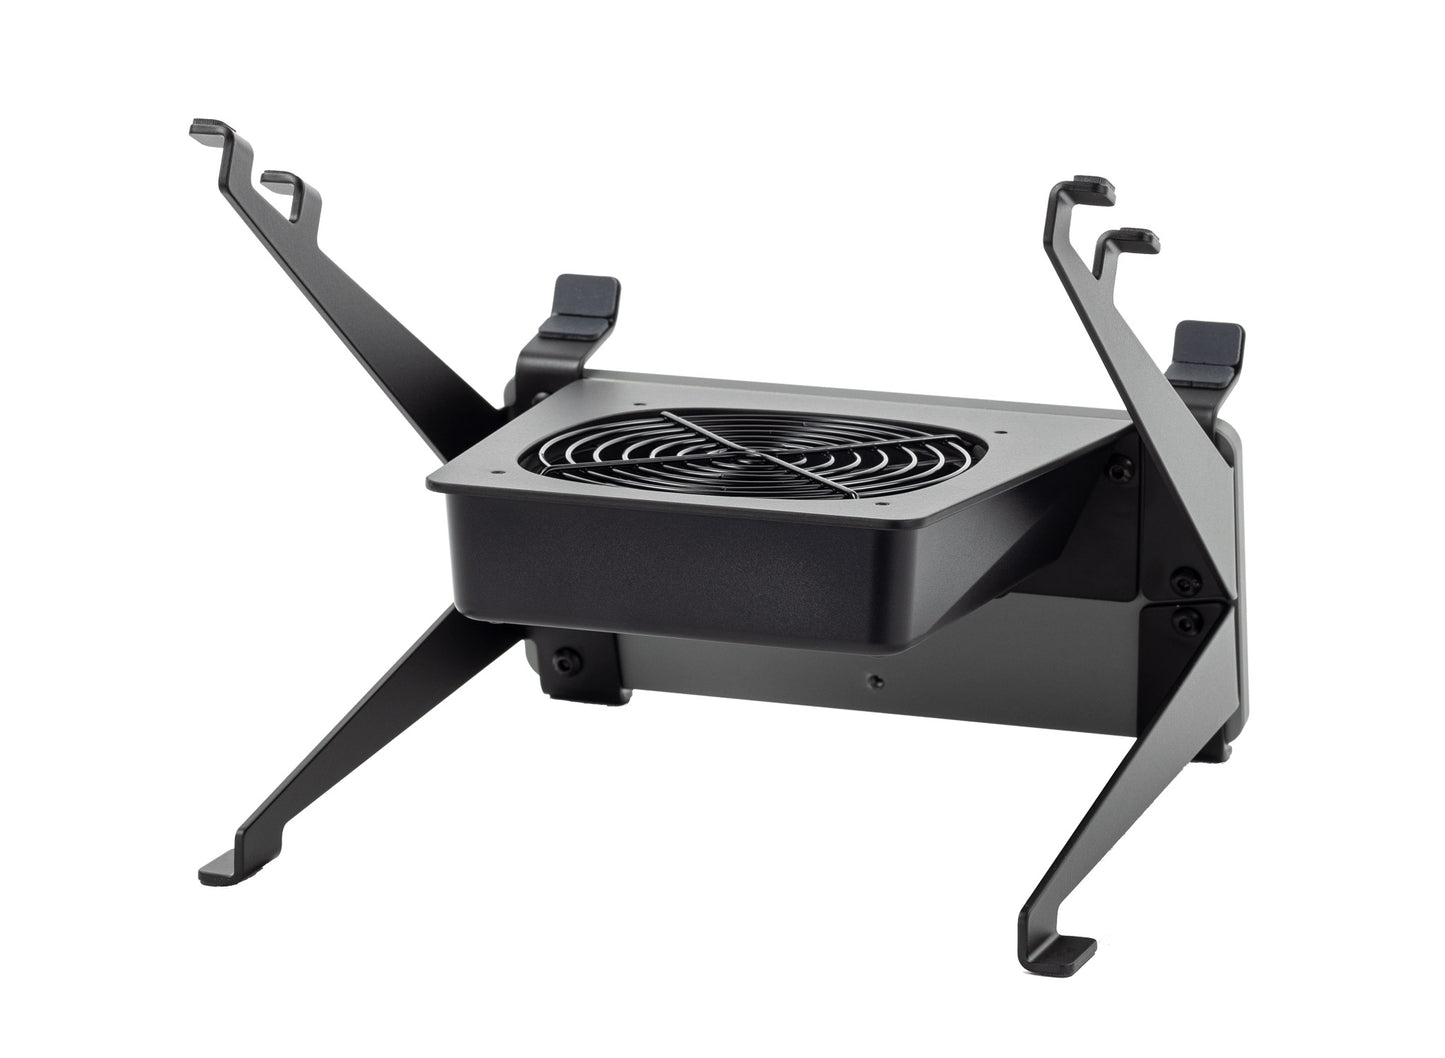 SVALT Cooling Stand model SRxB14 gray back side view for quiet fan cooling performance with Apple and PC laptops